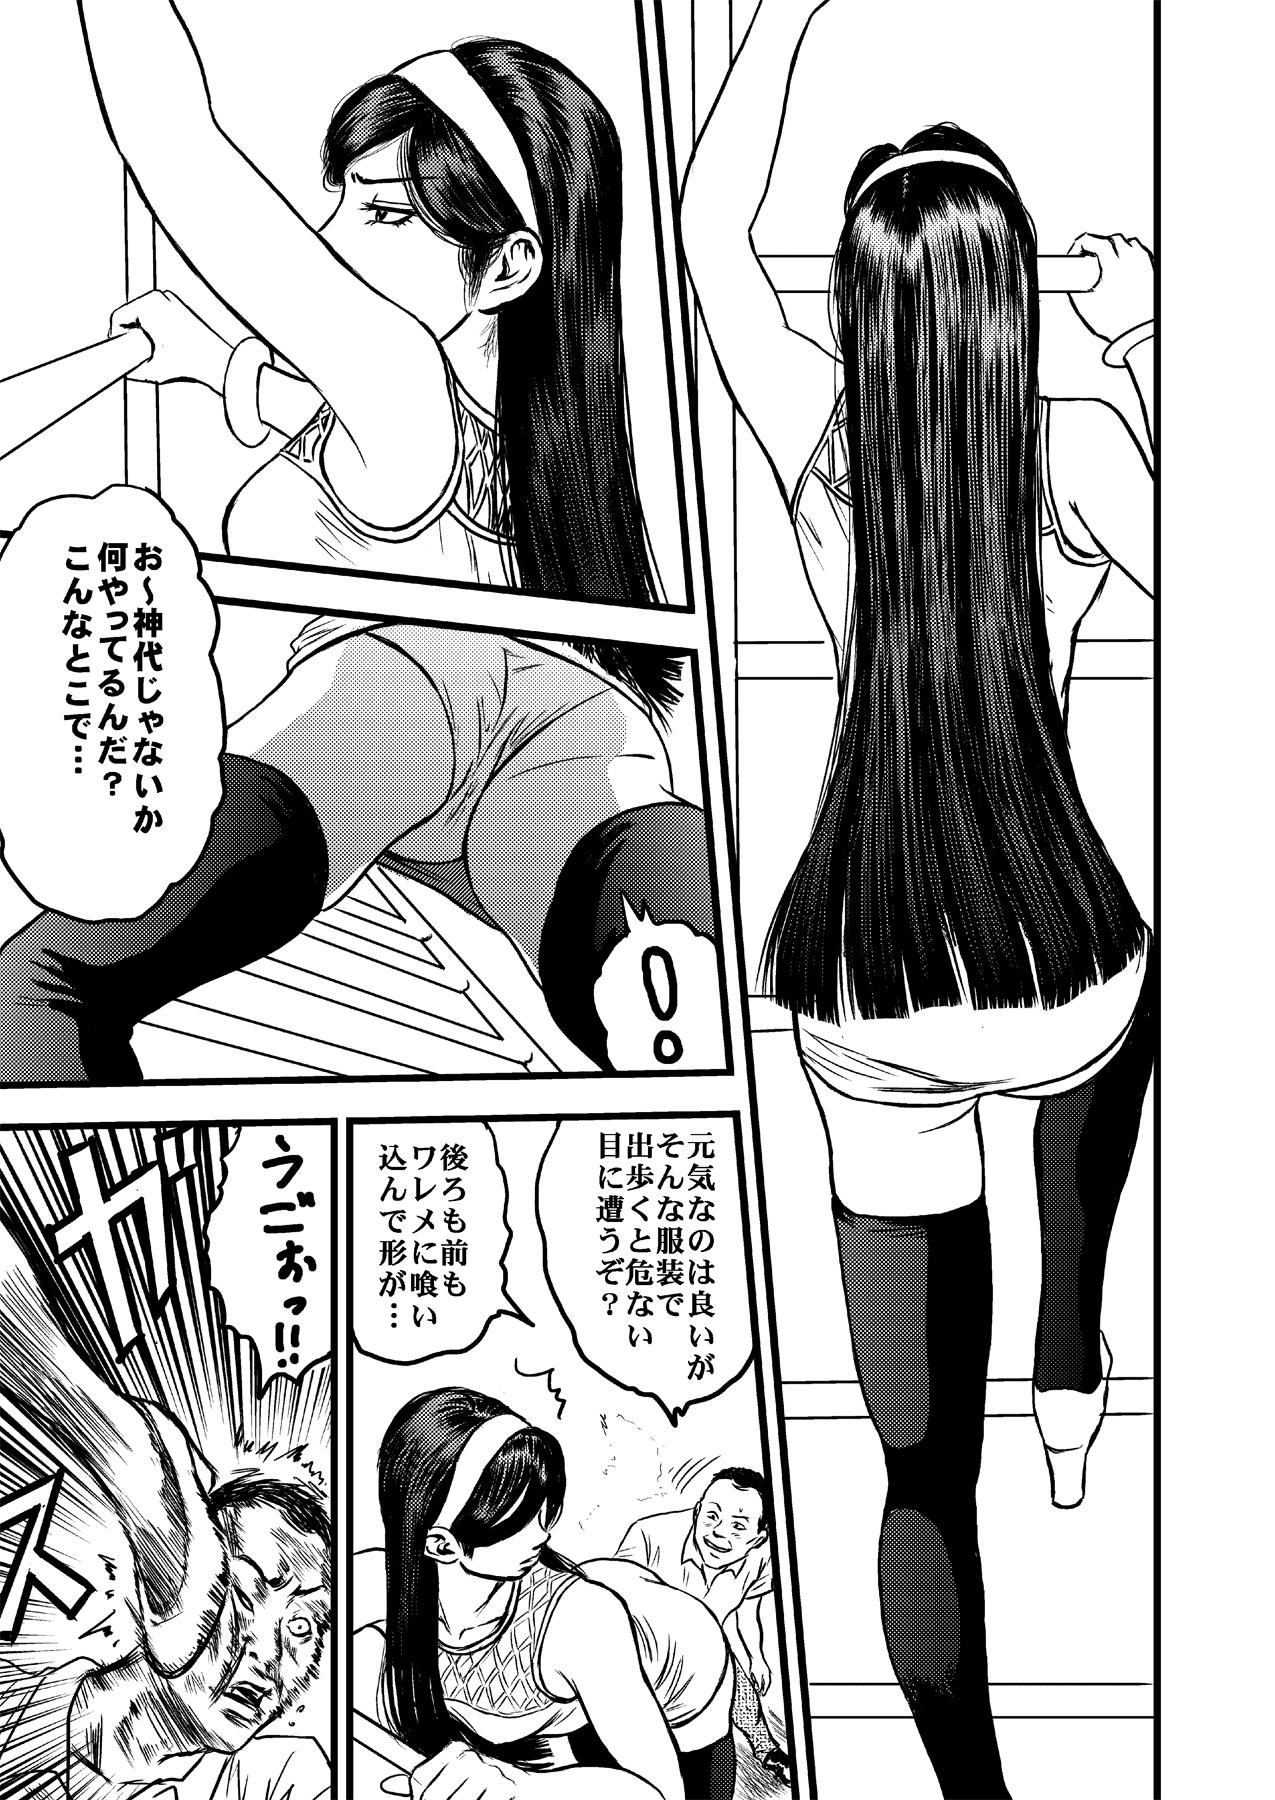 Fucking Sex Occult Ojousama no Yuuutsu - Occult academy Amatoriale - Page 5